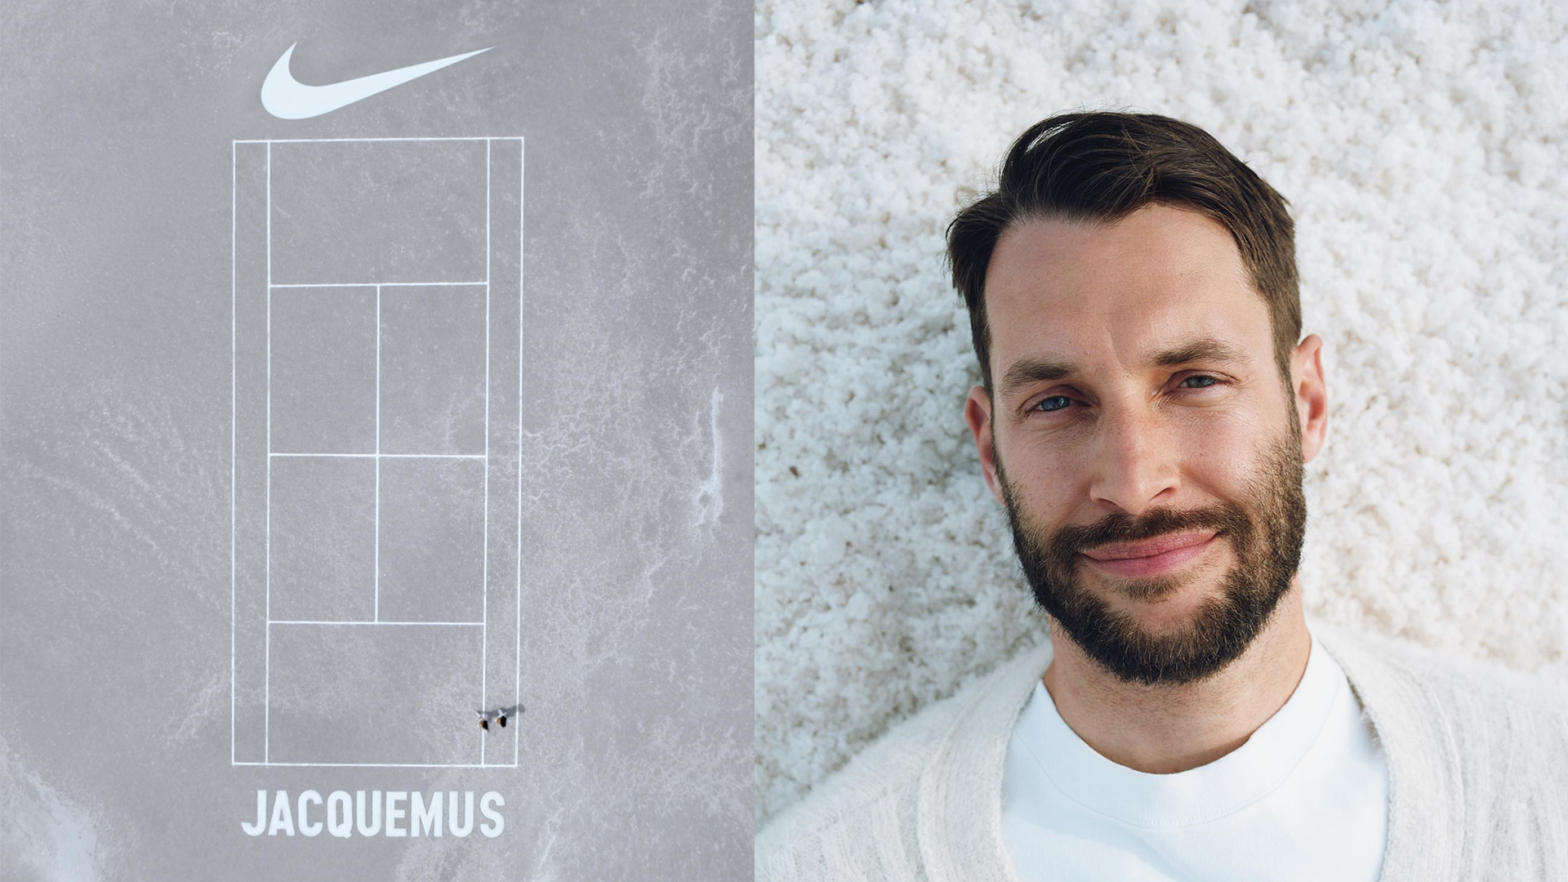 Jacquemus x Nike Collab—Here's What We Know